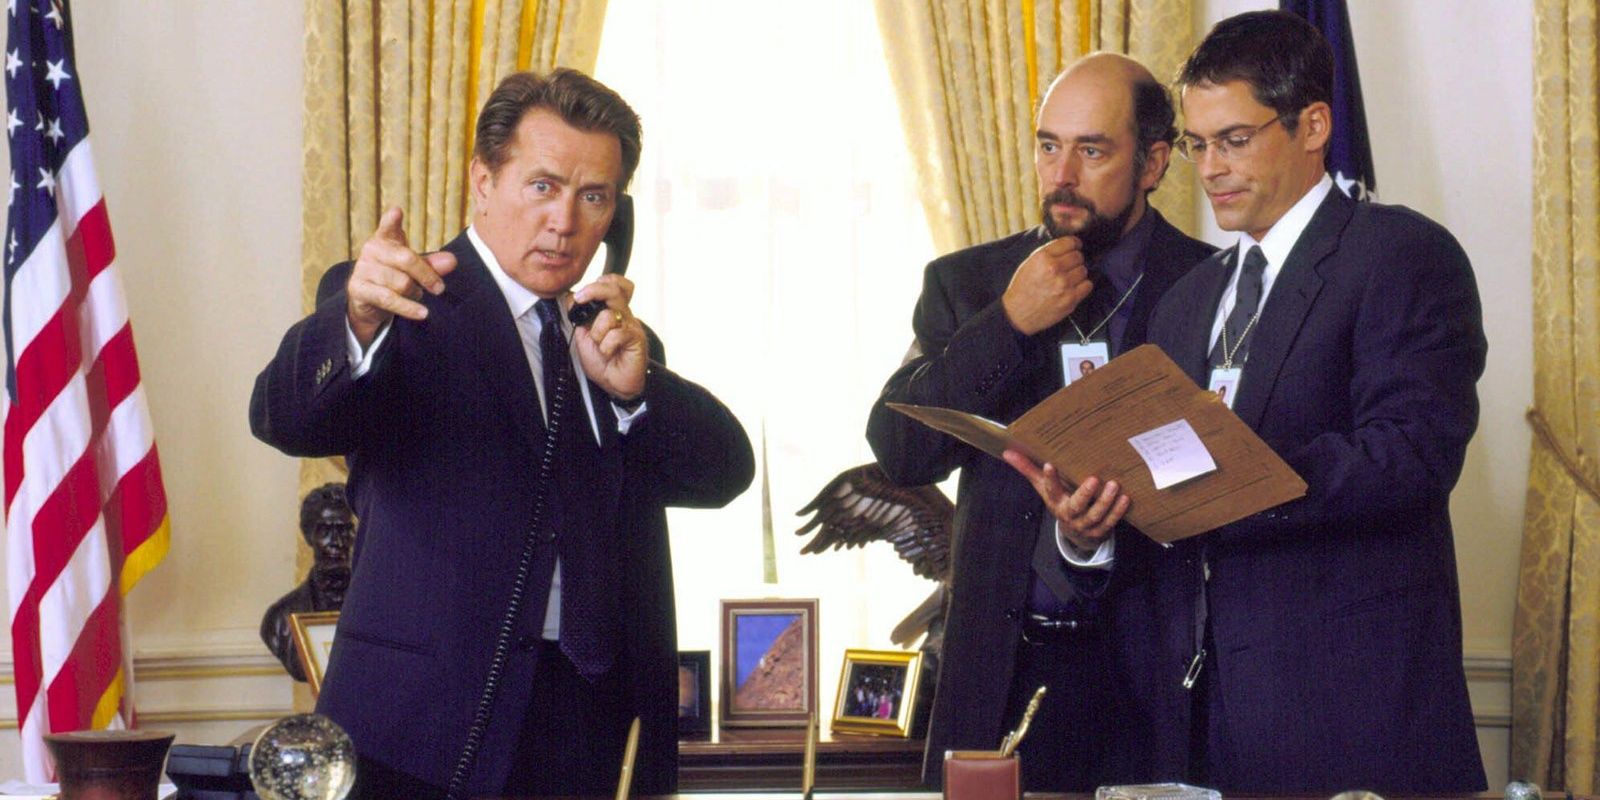 President Bartlet talks on the phone next to two staffers.